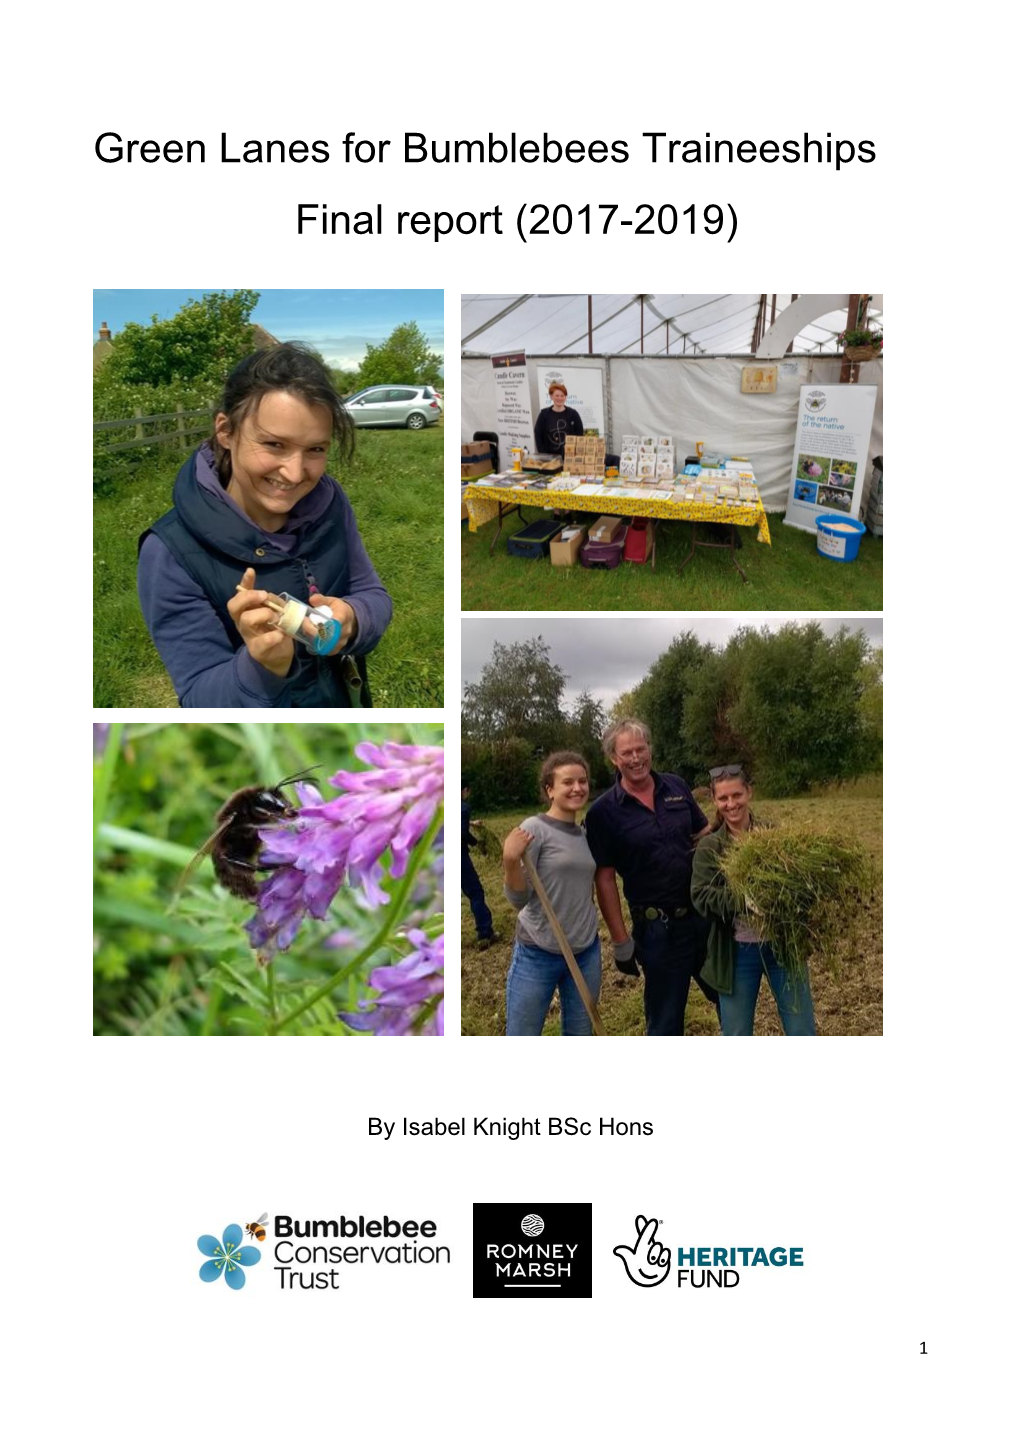 Green Lanes for Bumblebees Traineeships Final Report (2017-2019)